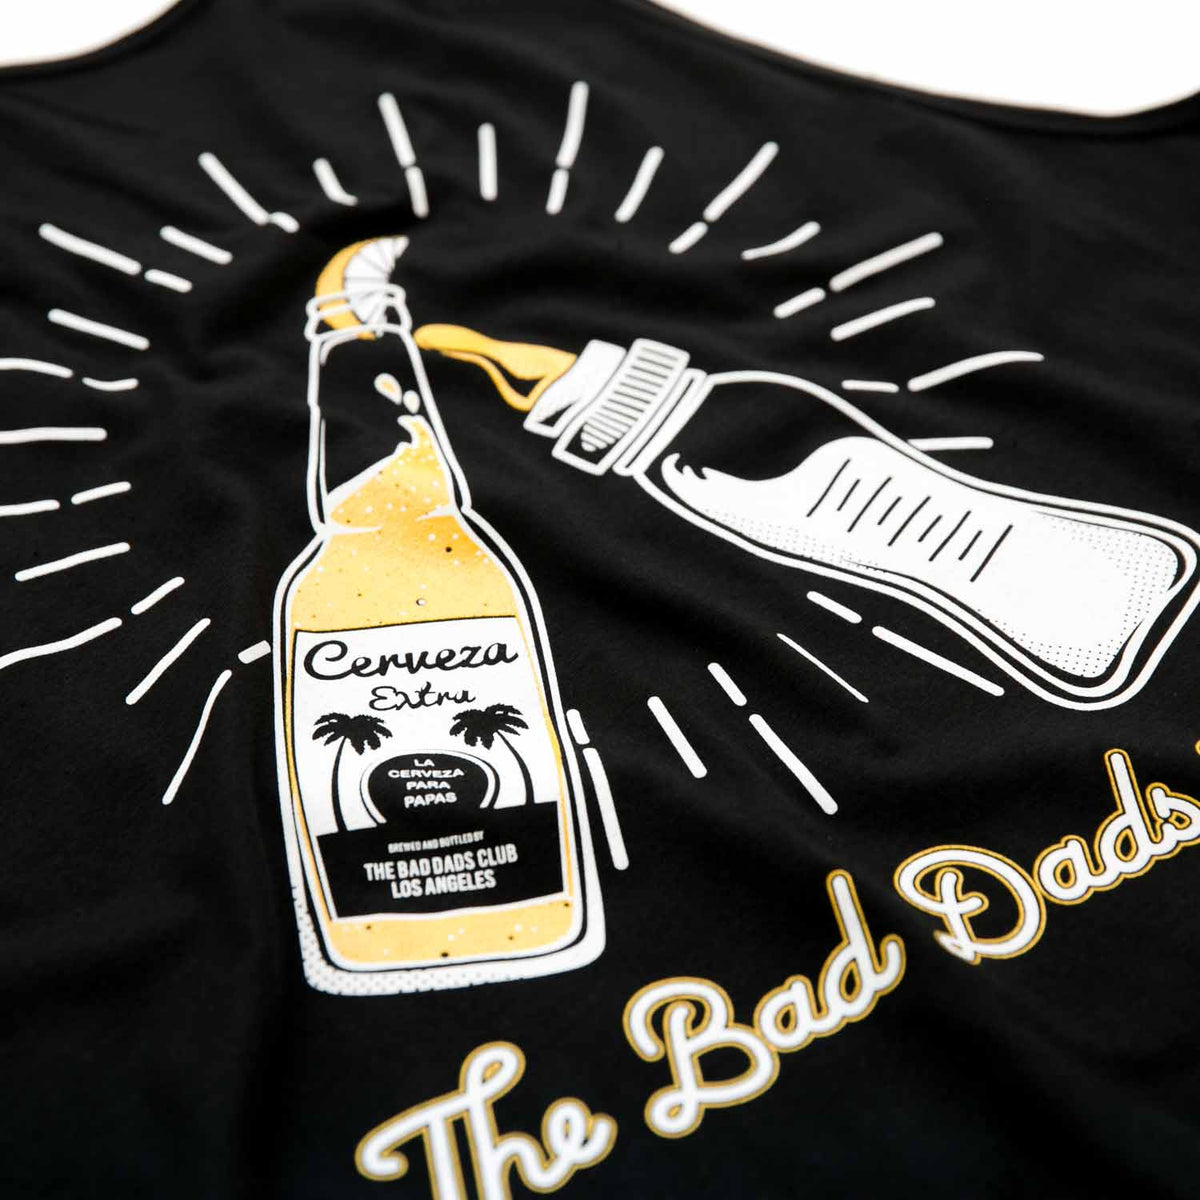 BAD DADS "CHEERS" TANK